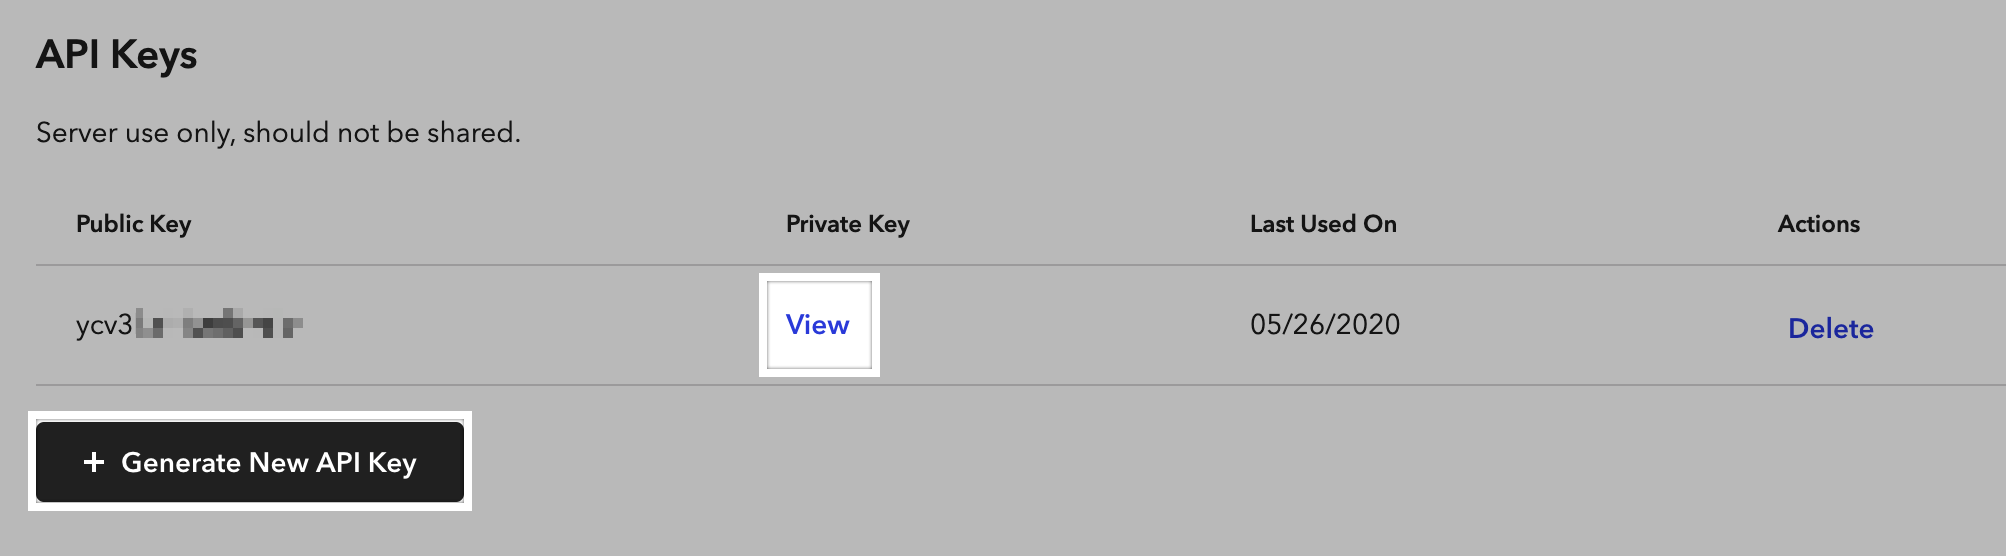 Viewing or generating API keys in the Braintree control panel